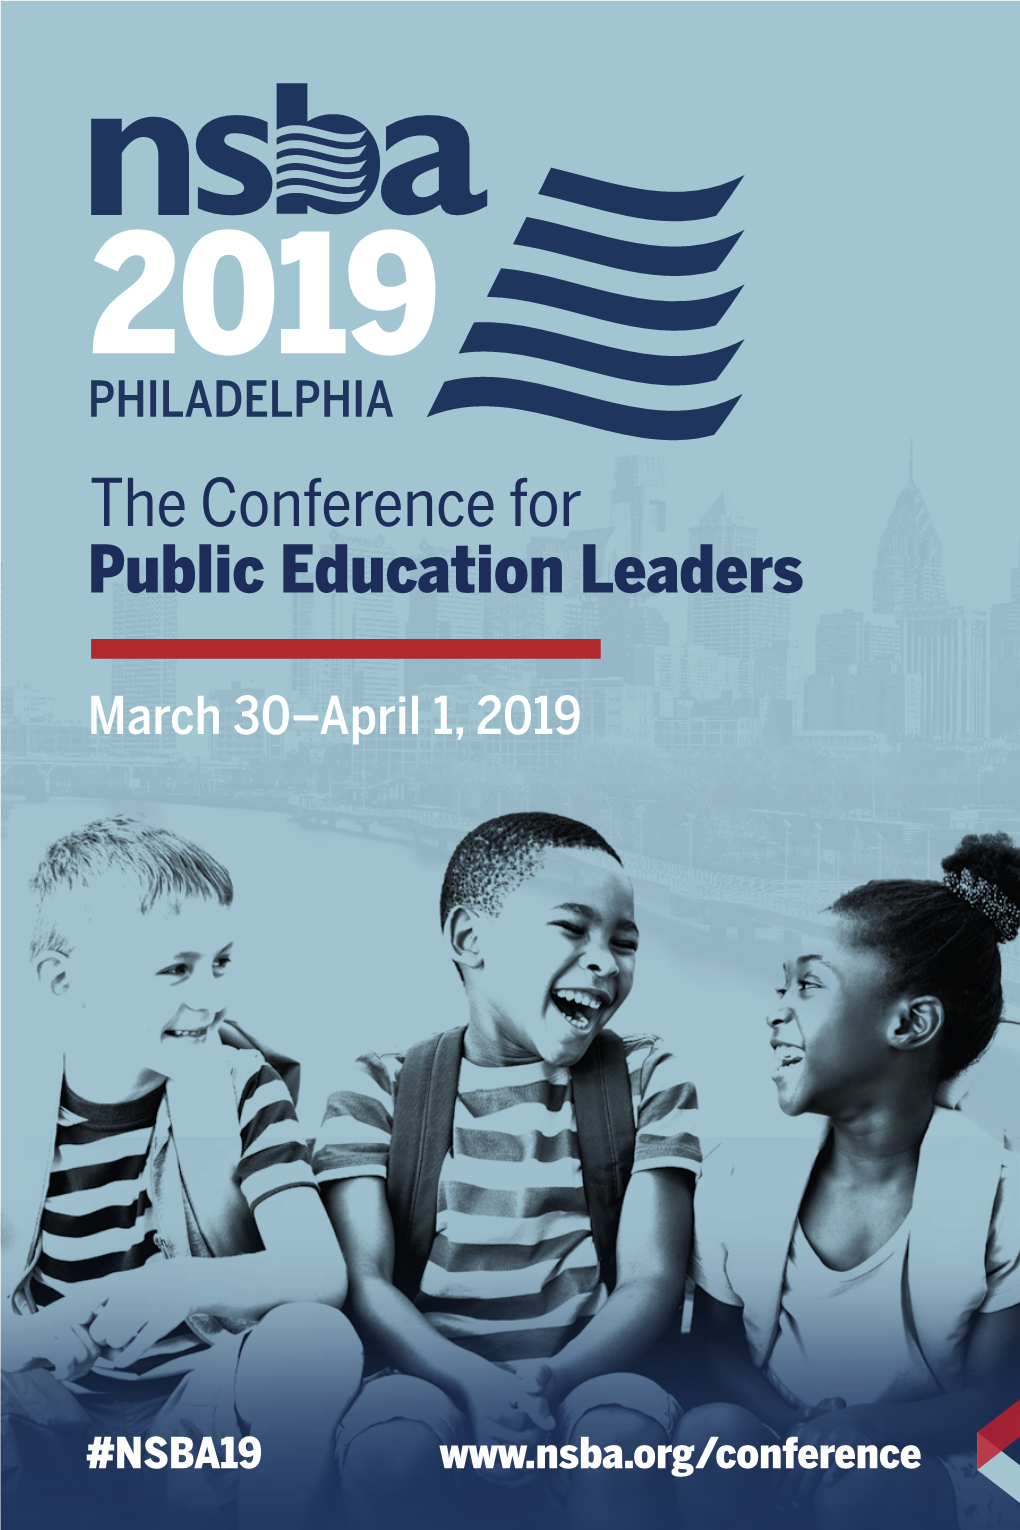 The Conference for Public Education Leaders